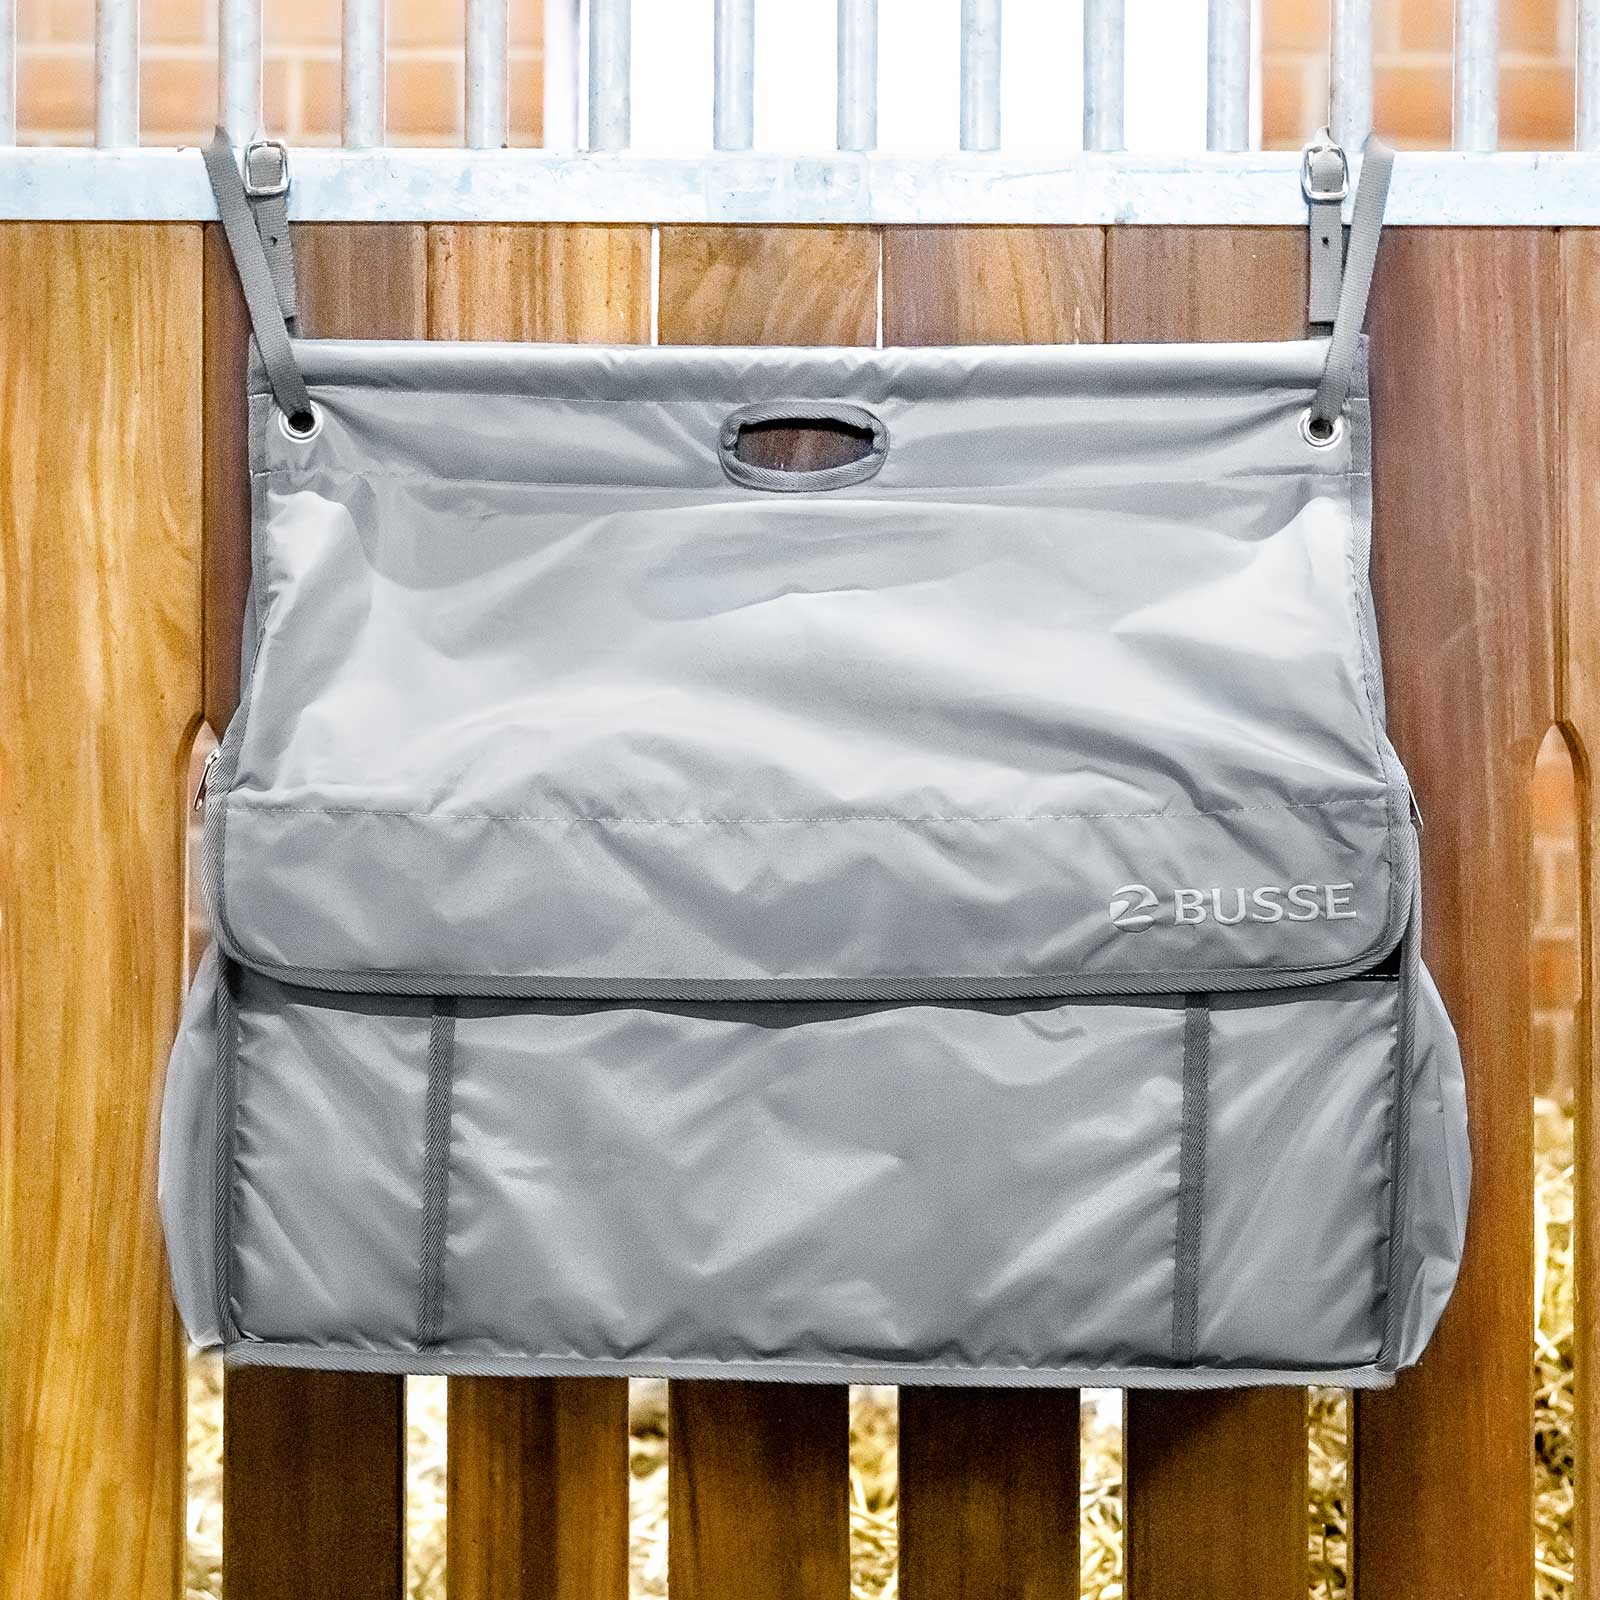 Busse Stable Bag Rio gray